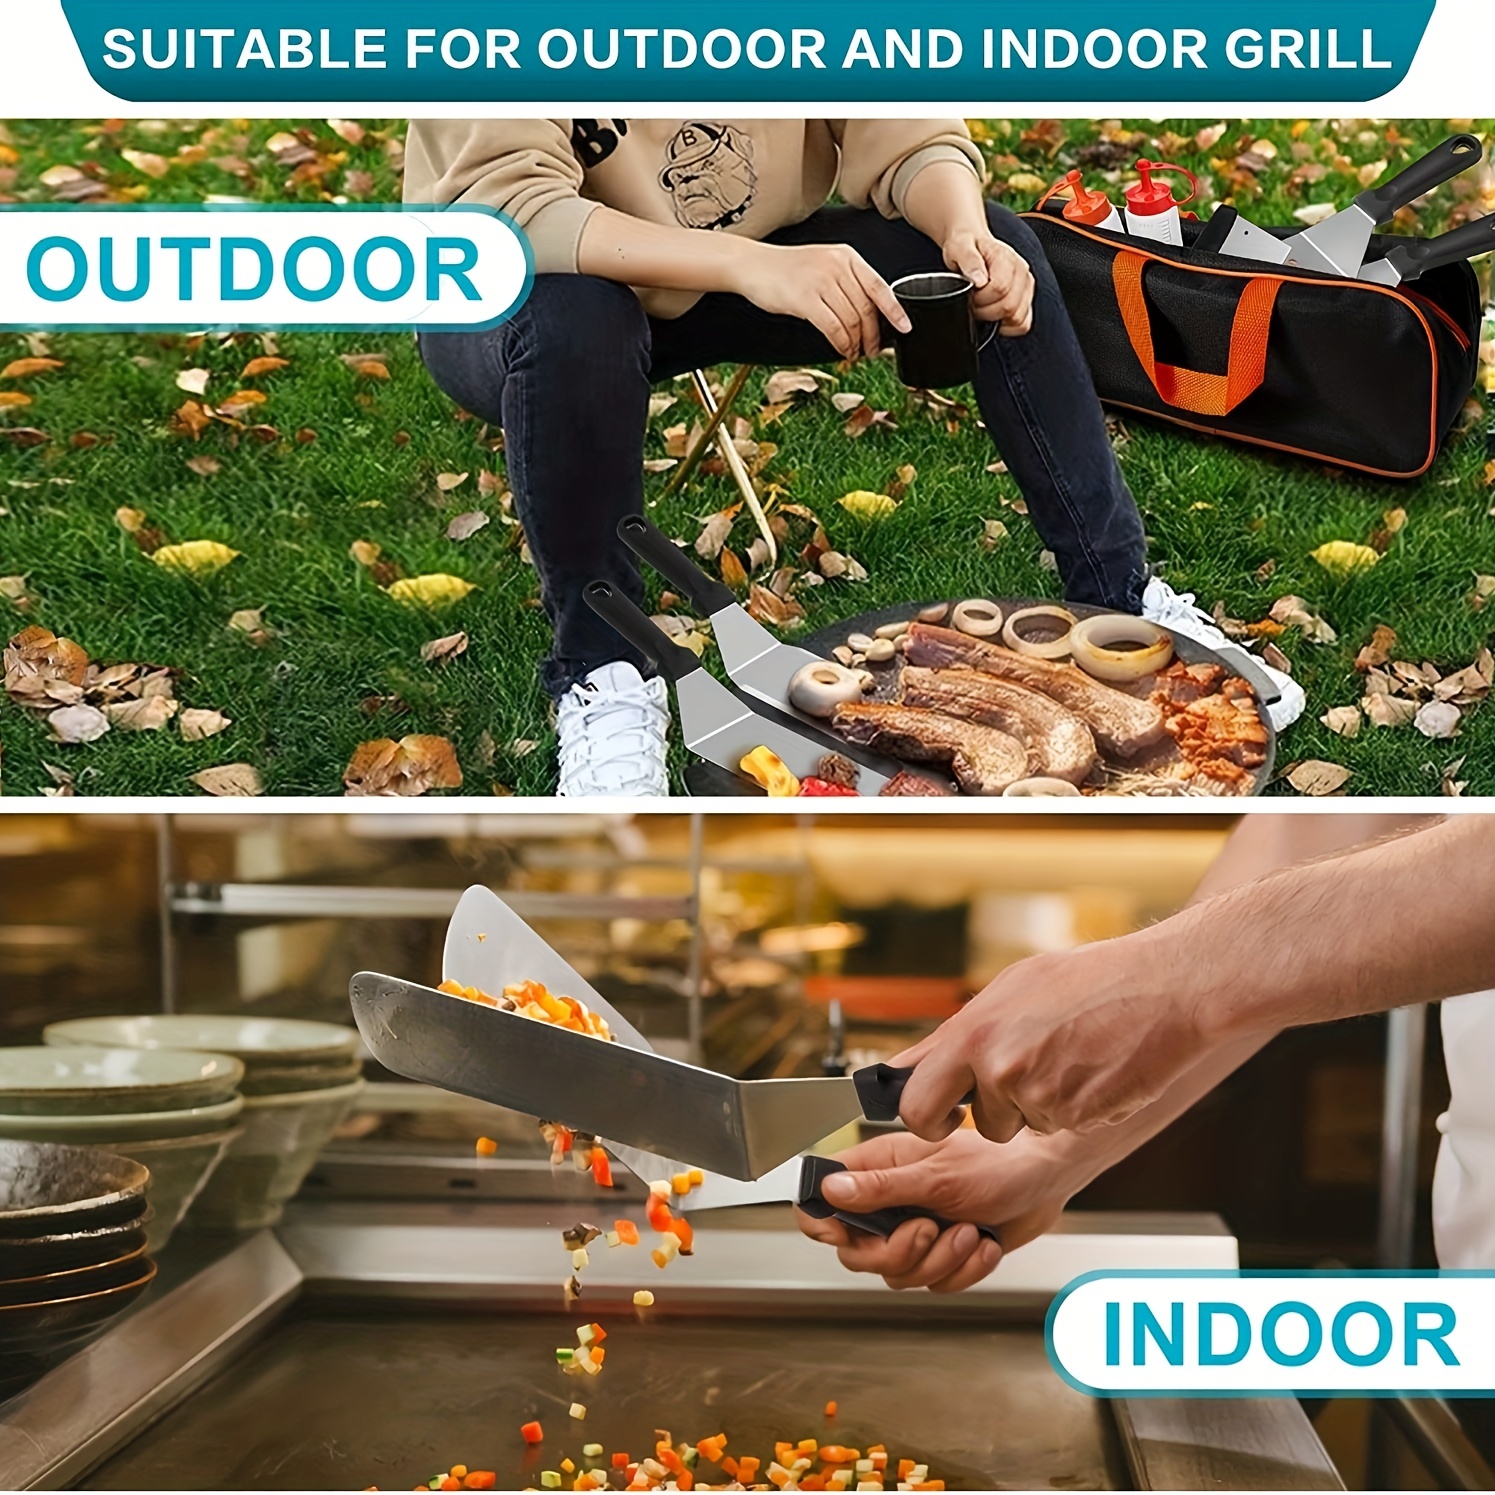 stainless steel cast iron portable indoor